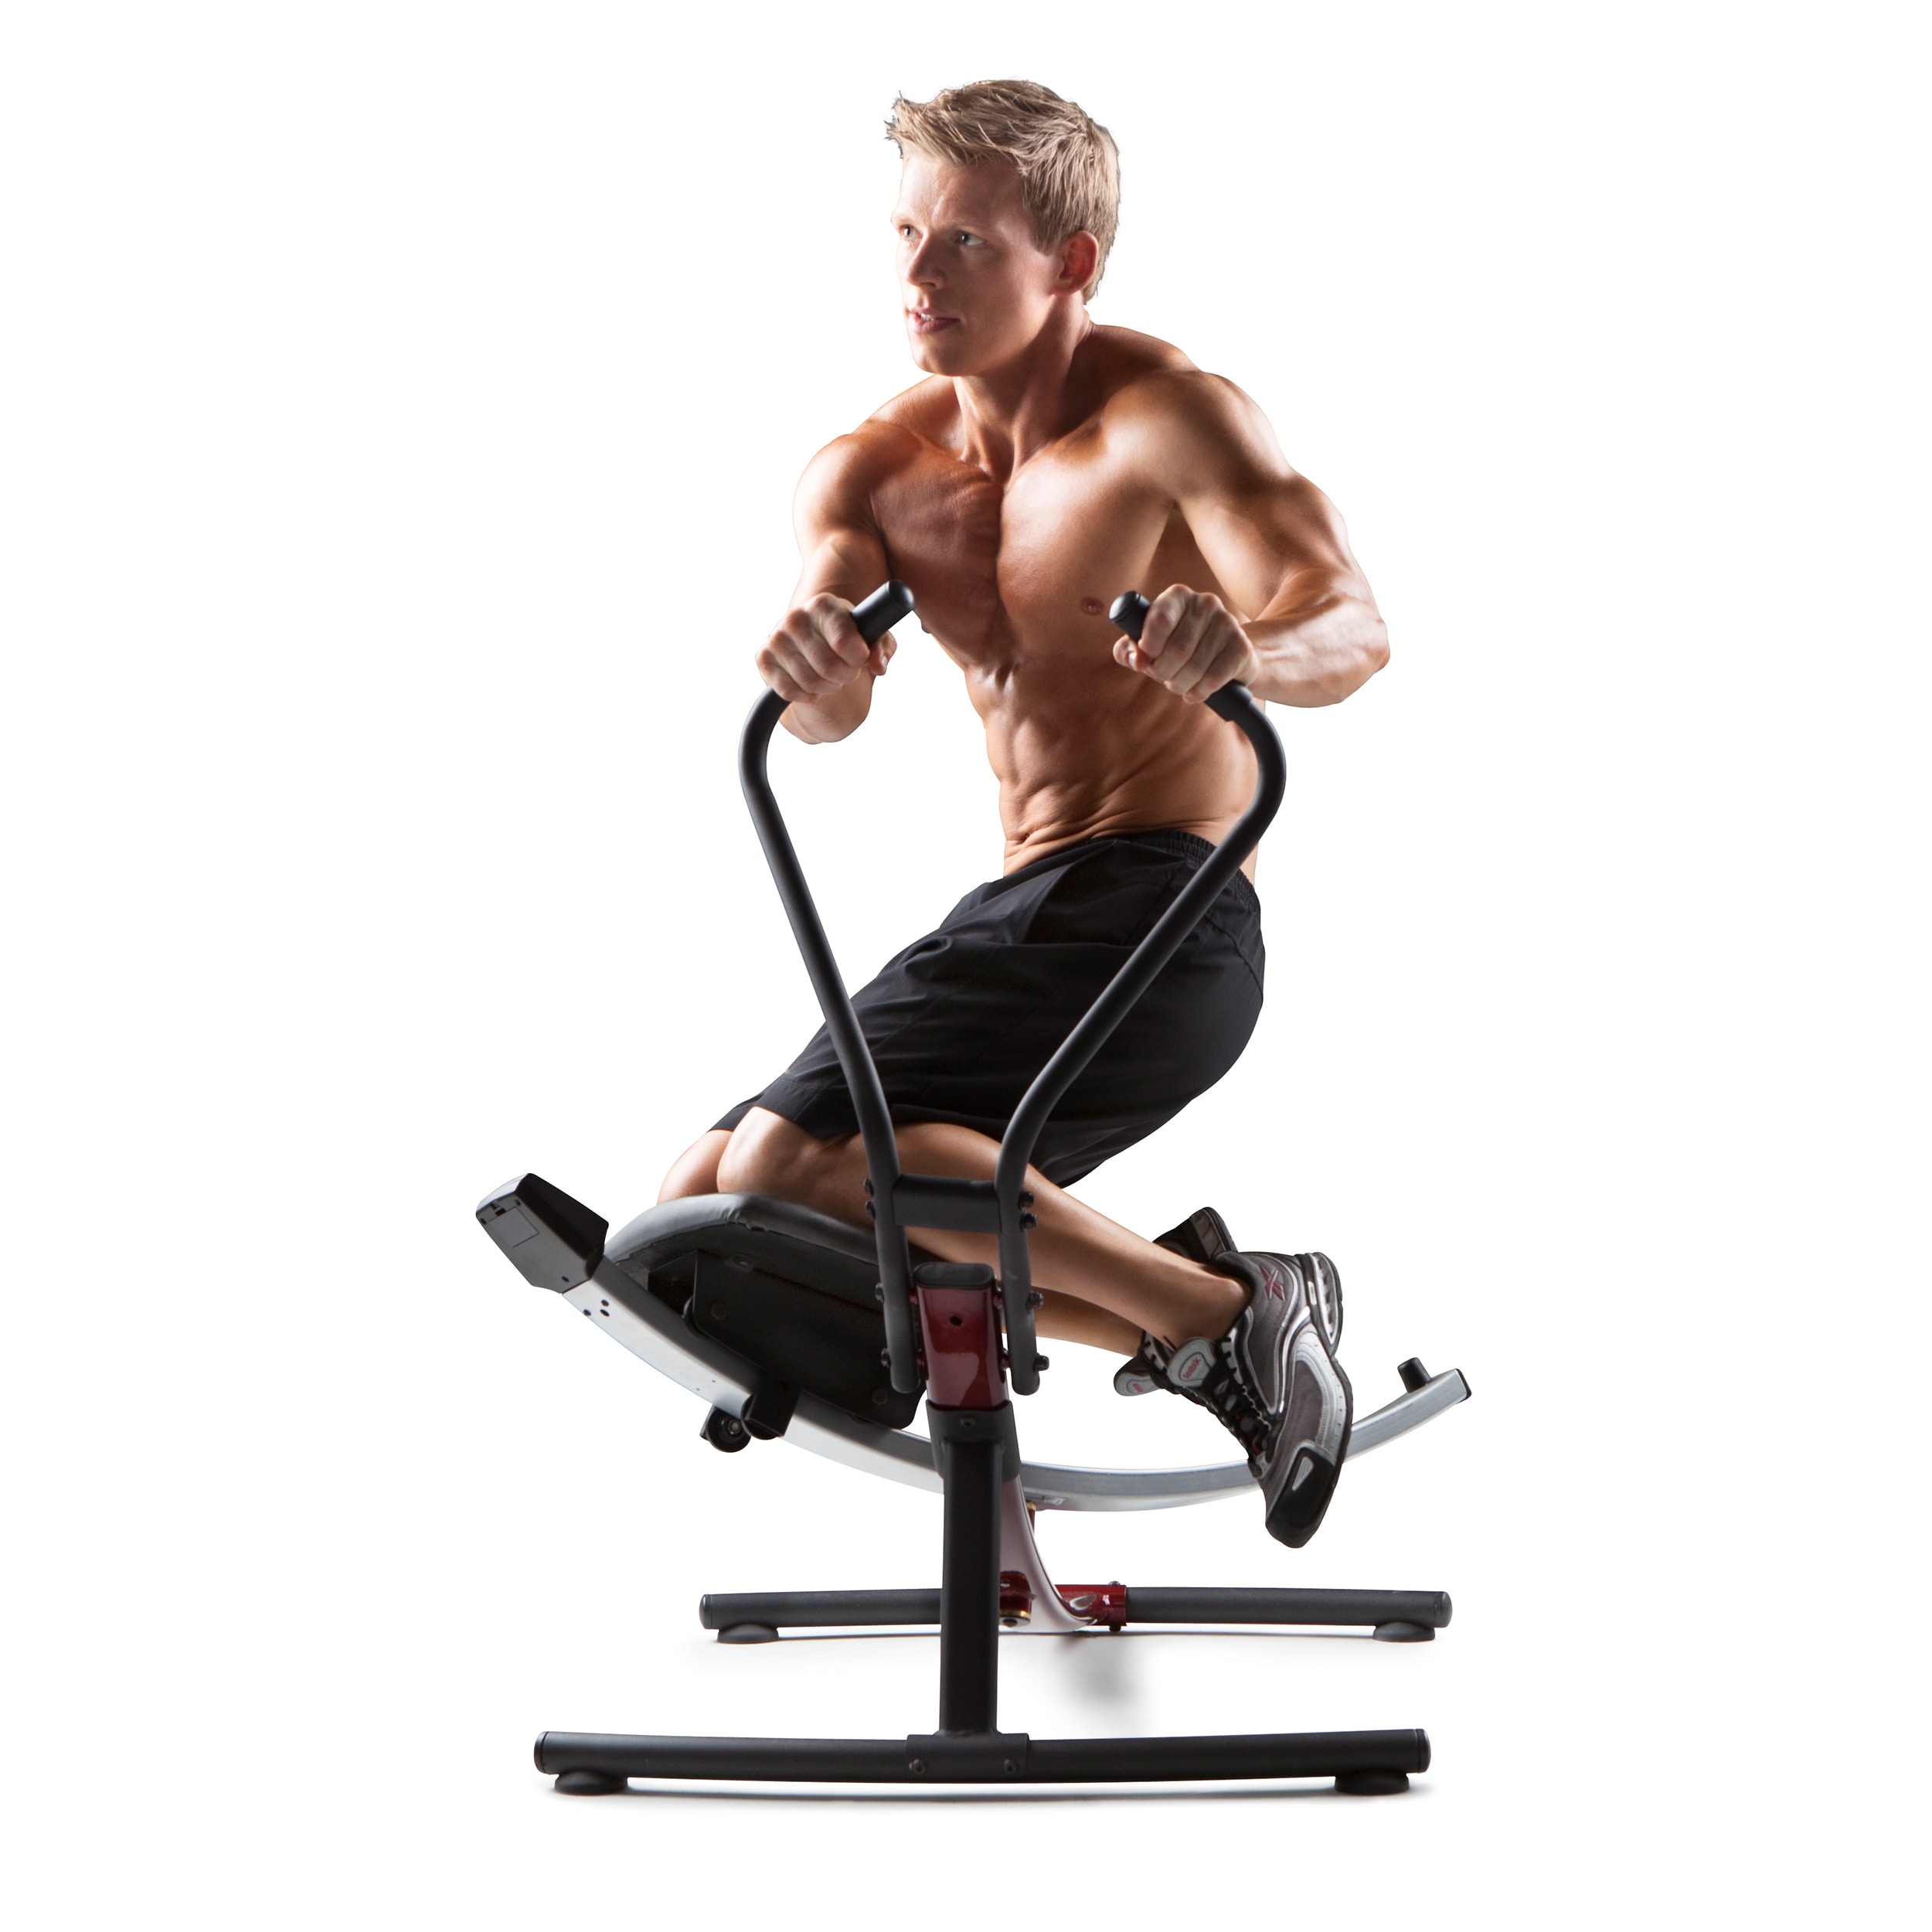 Buy Portable Abs Glider Generator Exercise Equipment online